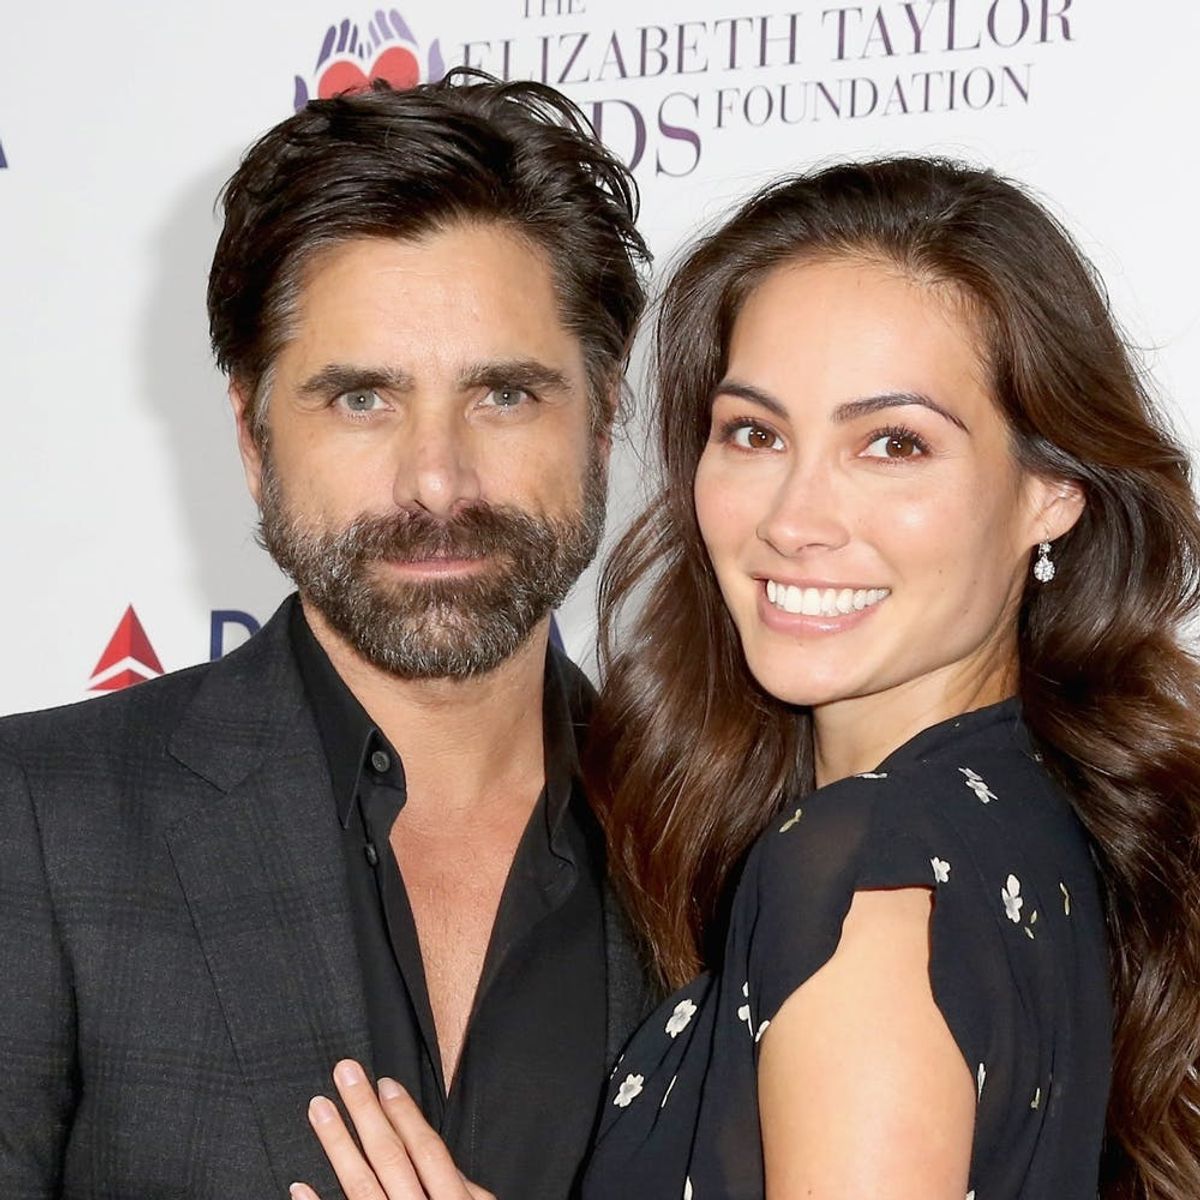 It’s Official: John Stamos and Caitlin McHugh Are Hitched!